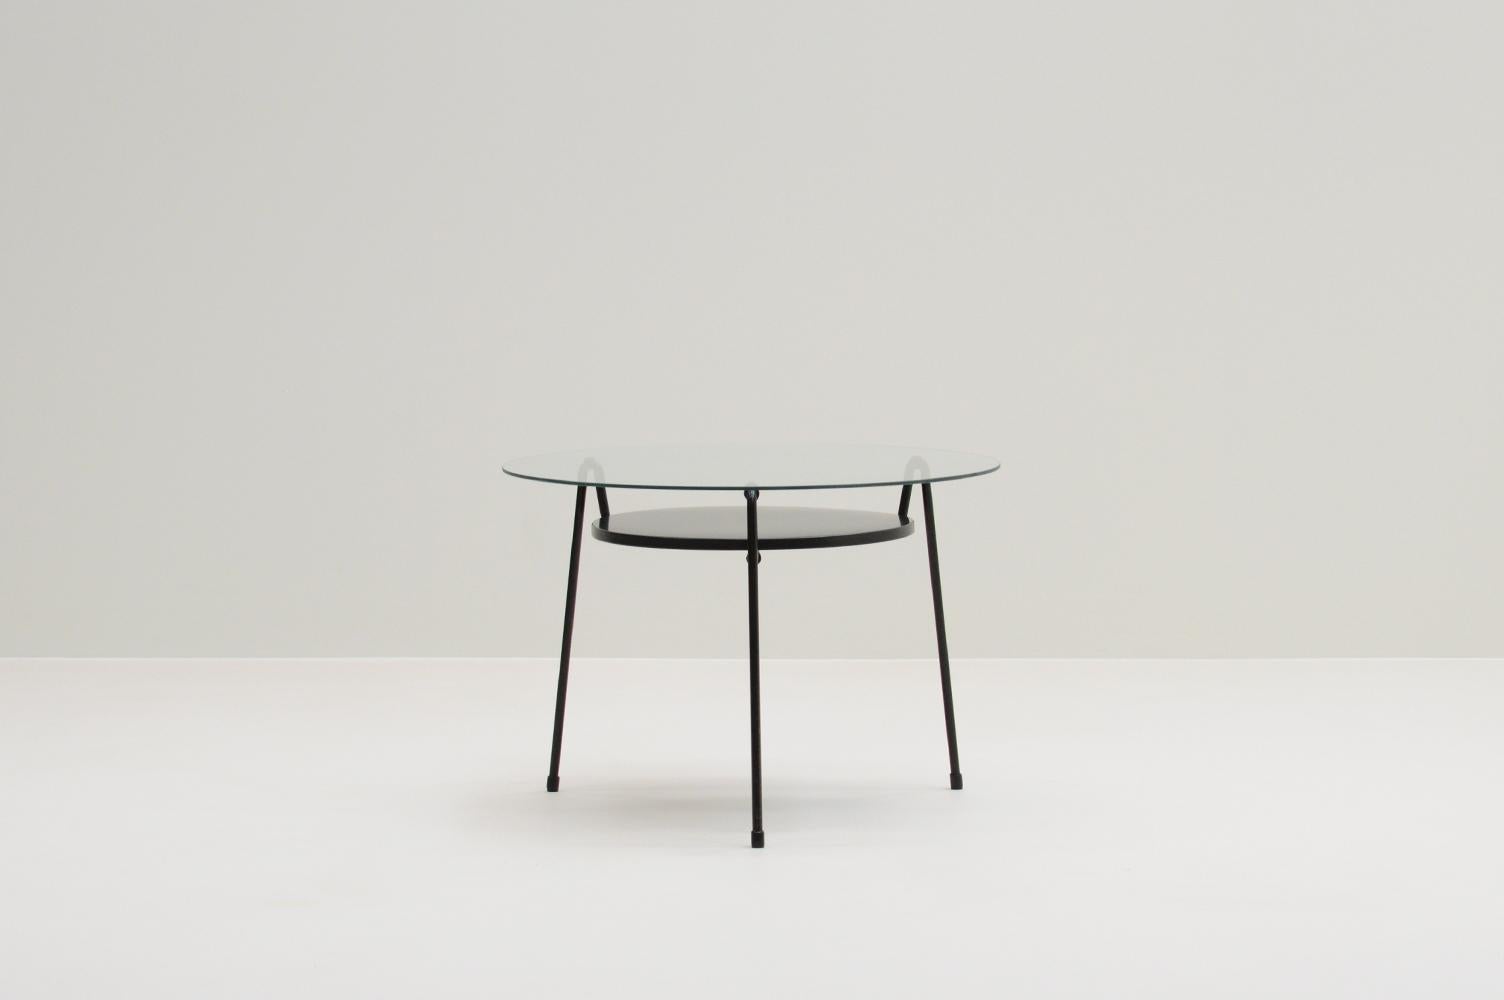 535 table by Wim Rietveld for Gispen, The Netherlands 50s. In 1953 Wim Rietveld designed the Model 535 side table, also known as the “Mug” (mosquito) table. Black 3-legged table with metal tray and glass top. Some scratches on the glas top, but in